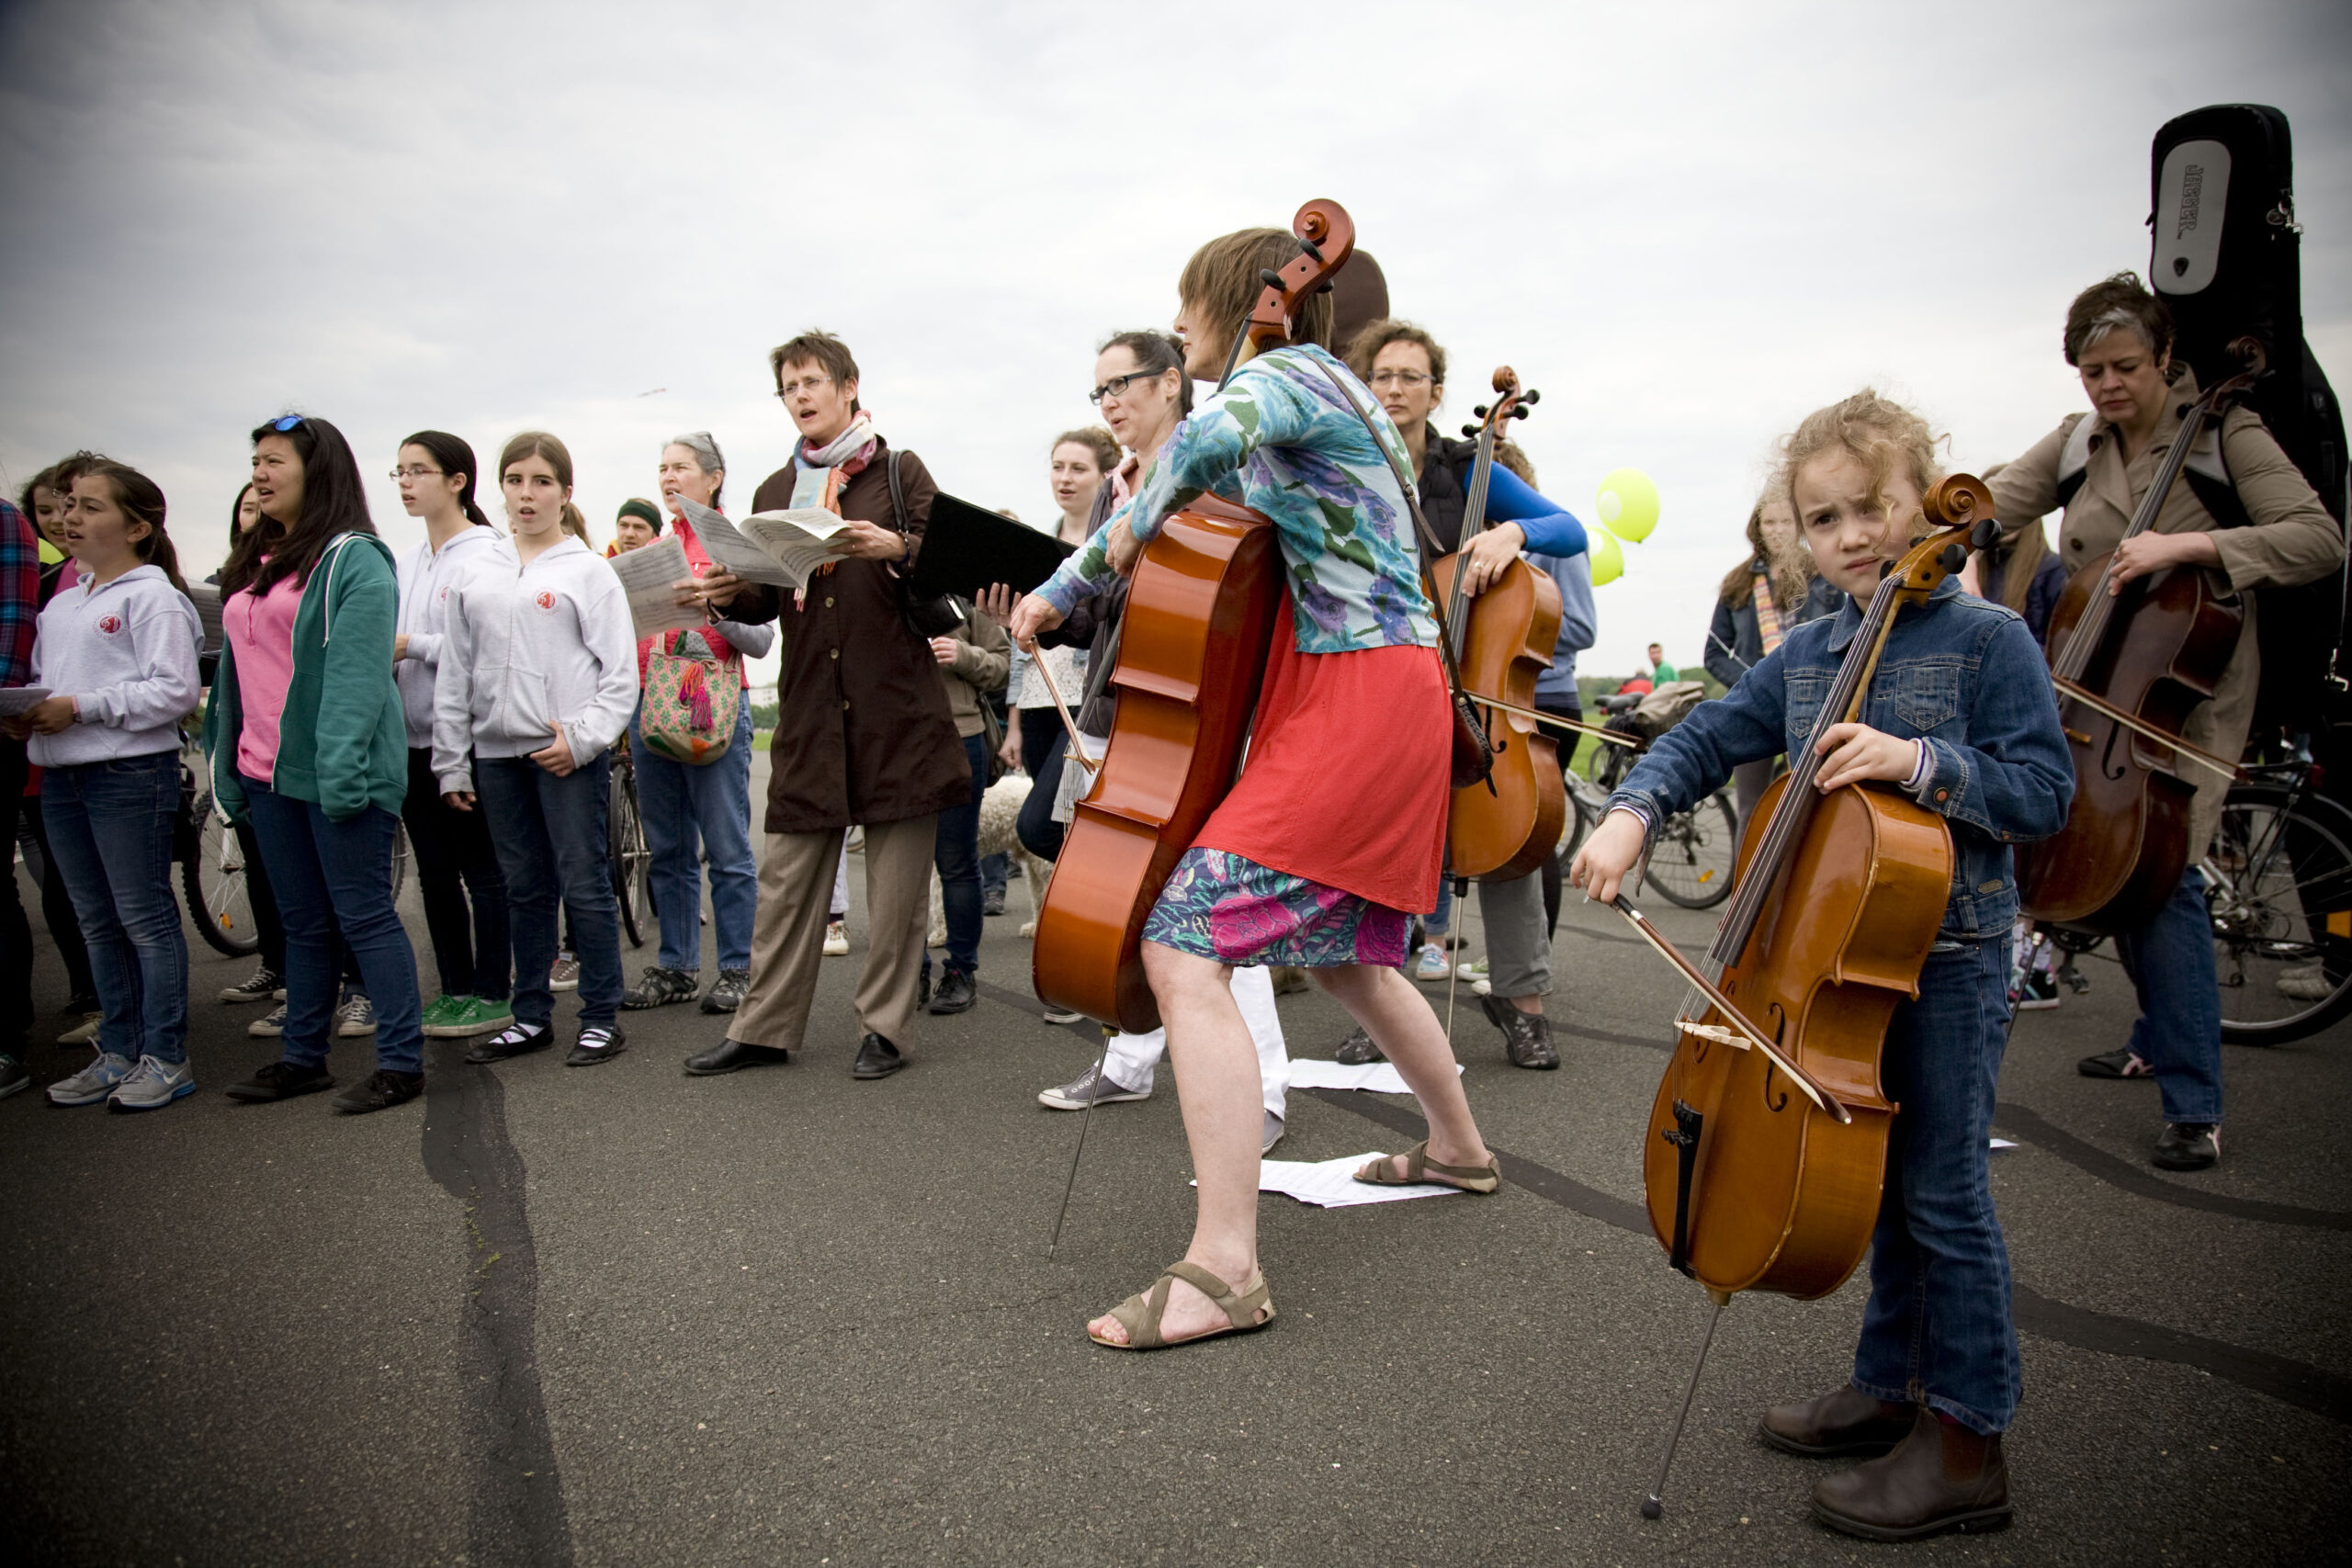 Musicians of all ages performing outdoors